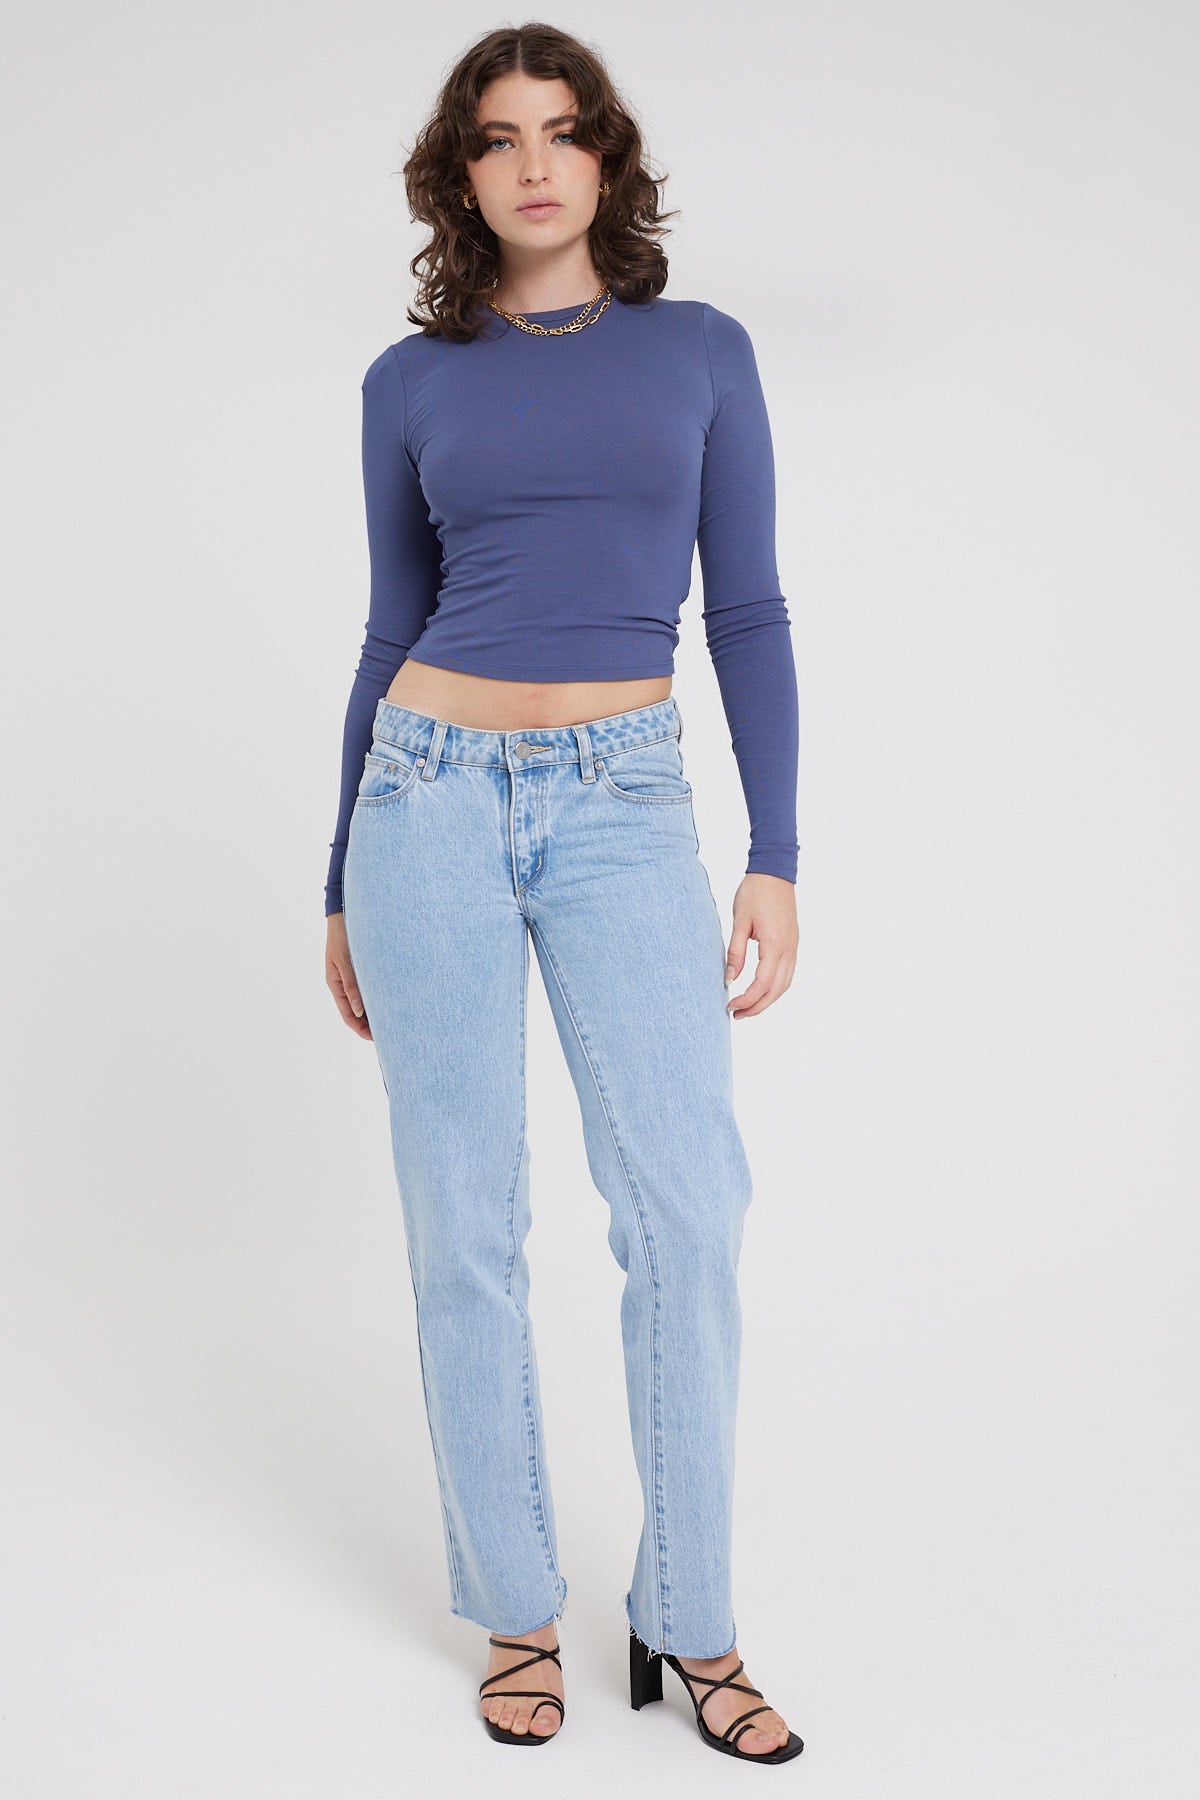 Perfect Stranger Long Sleeve Top Blue – Universal Store